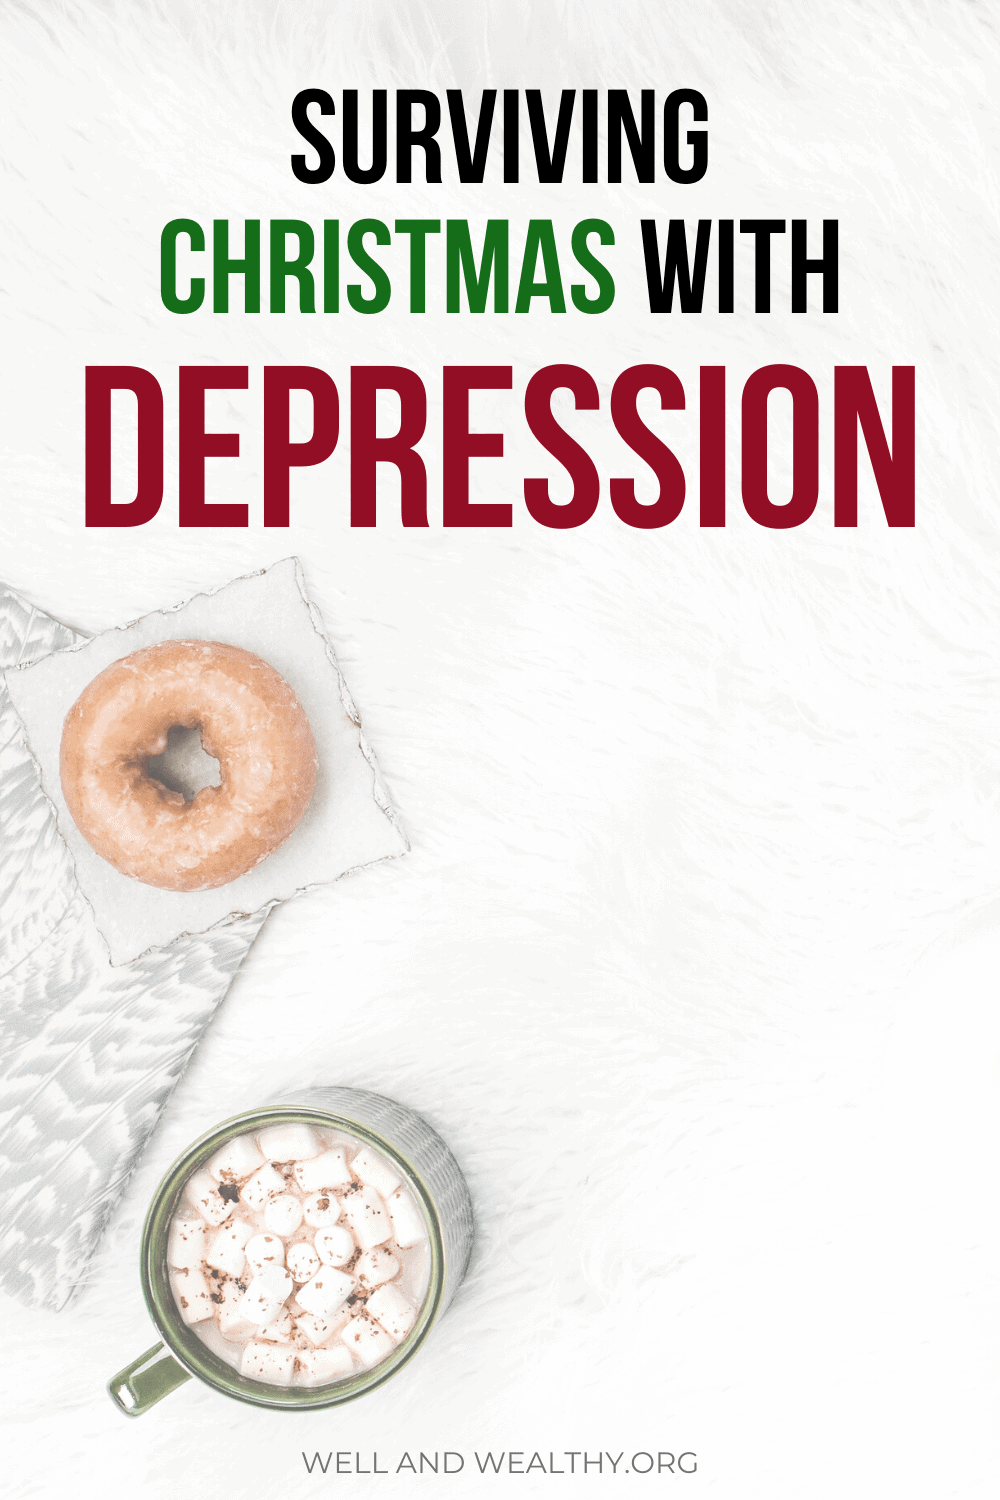 Worried about your mental health during Christmas? Then check out this post full of ideas on how to get through the holidays with depression. Surviving Christmas with depression is possible especially when you have these self care through the holidays tips. You can be happy during the holidays! #mentalhealth #christmas #holidays #selfcare